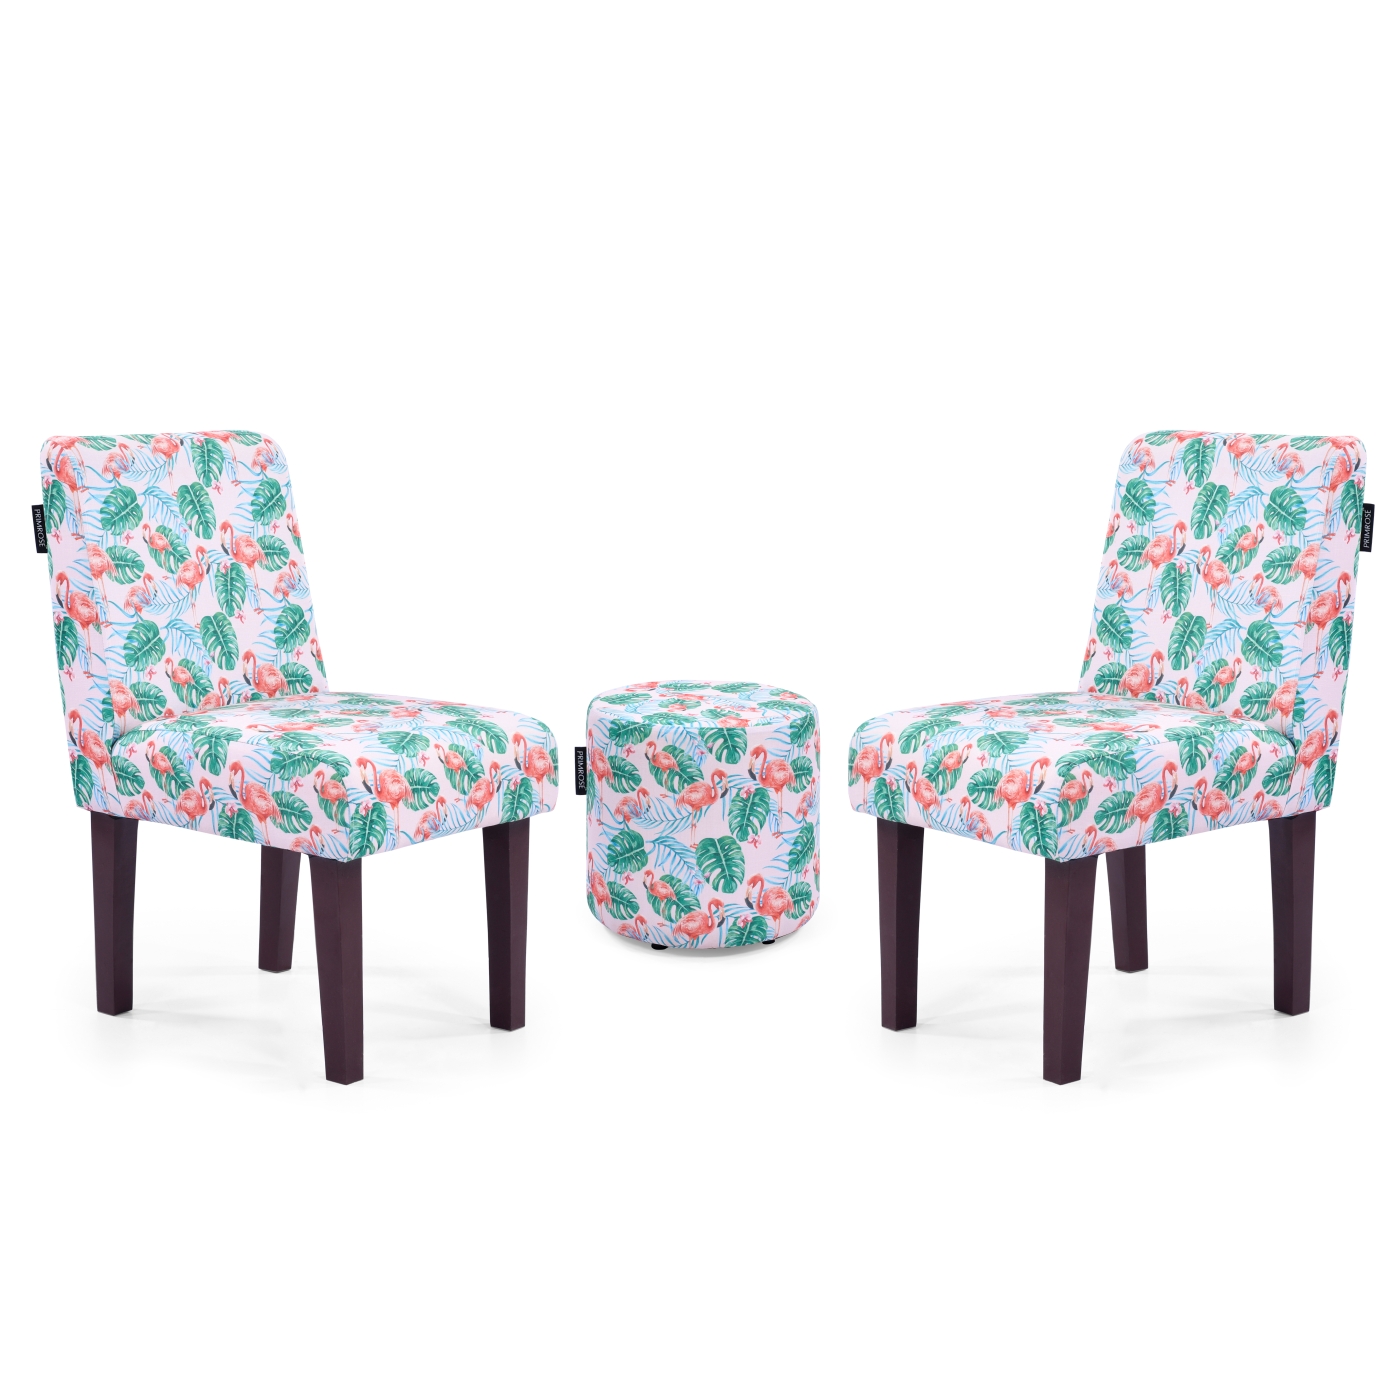 PRIMROSE Tropical Flamingo Digital Printed Faux Linen Fabric Dining Chair Combo (2 Chair+1 Ottoman) - Red, Green  